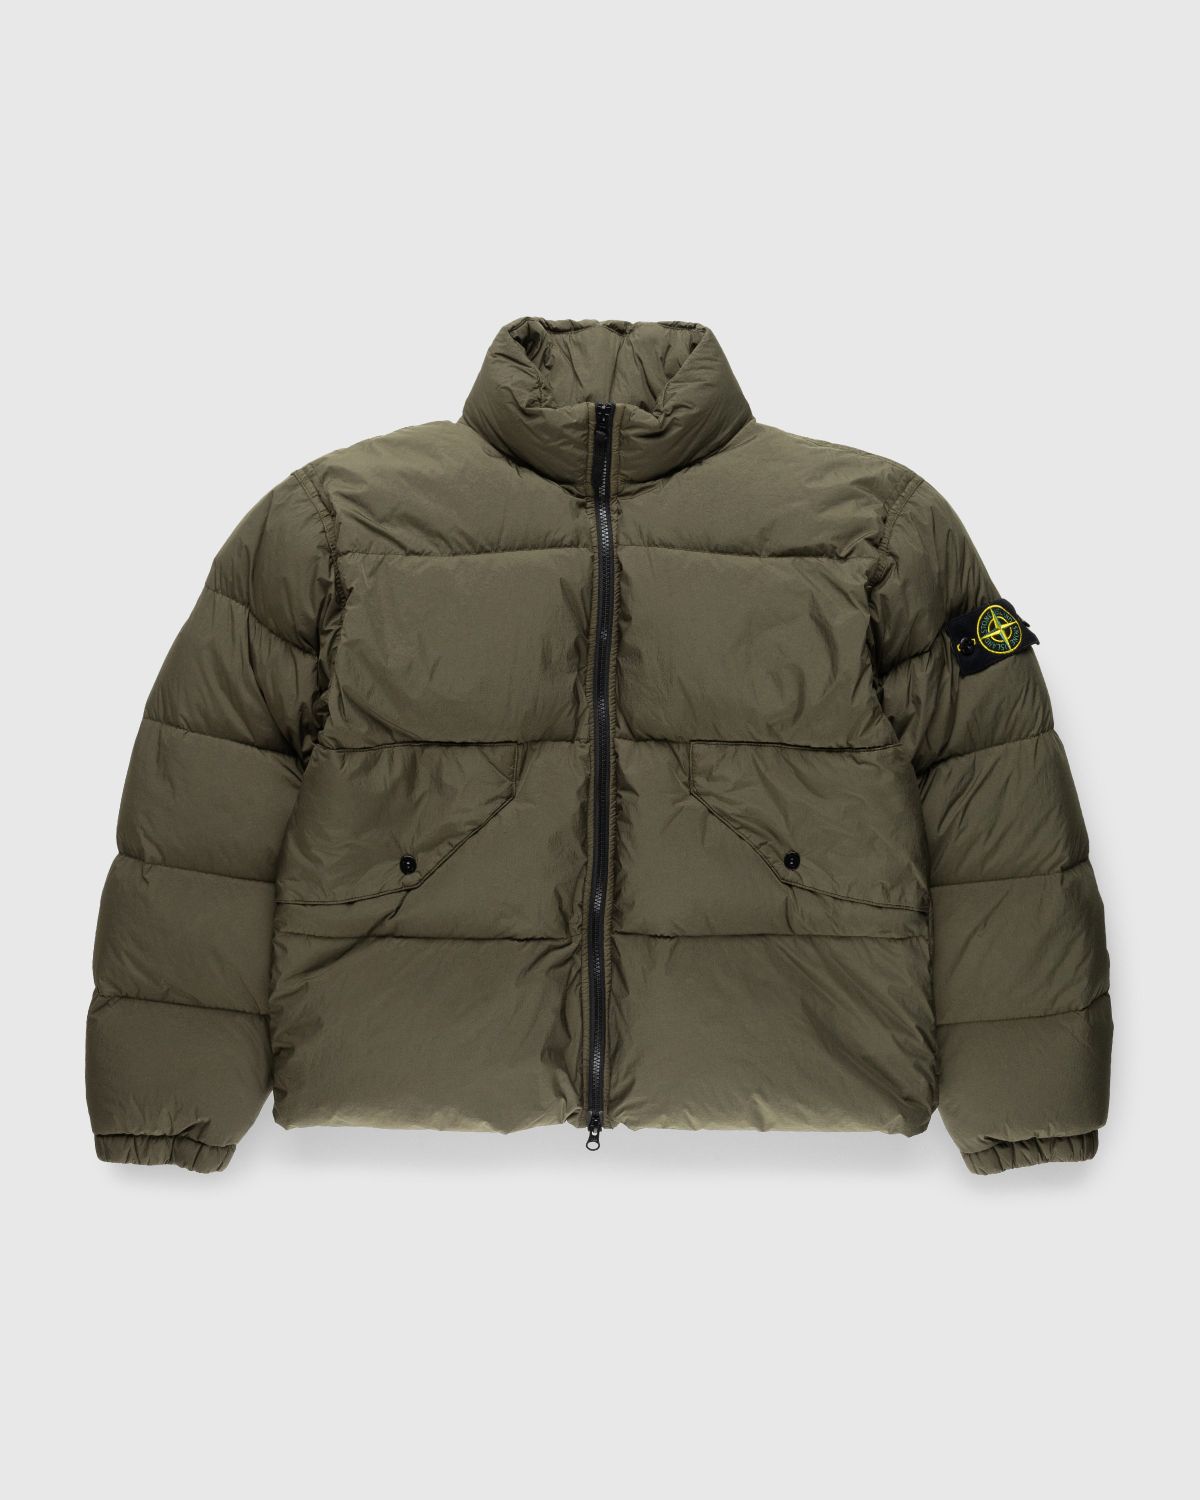 Stone Island – Garment-Dyed Recycled Nylon Down Jacket Olive - Outerwear - Green - Image 1